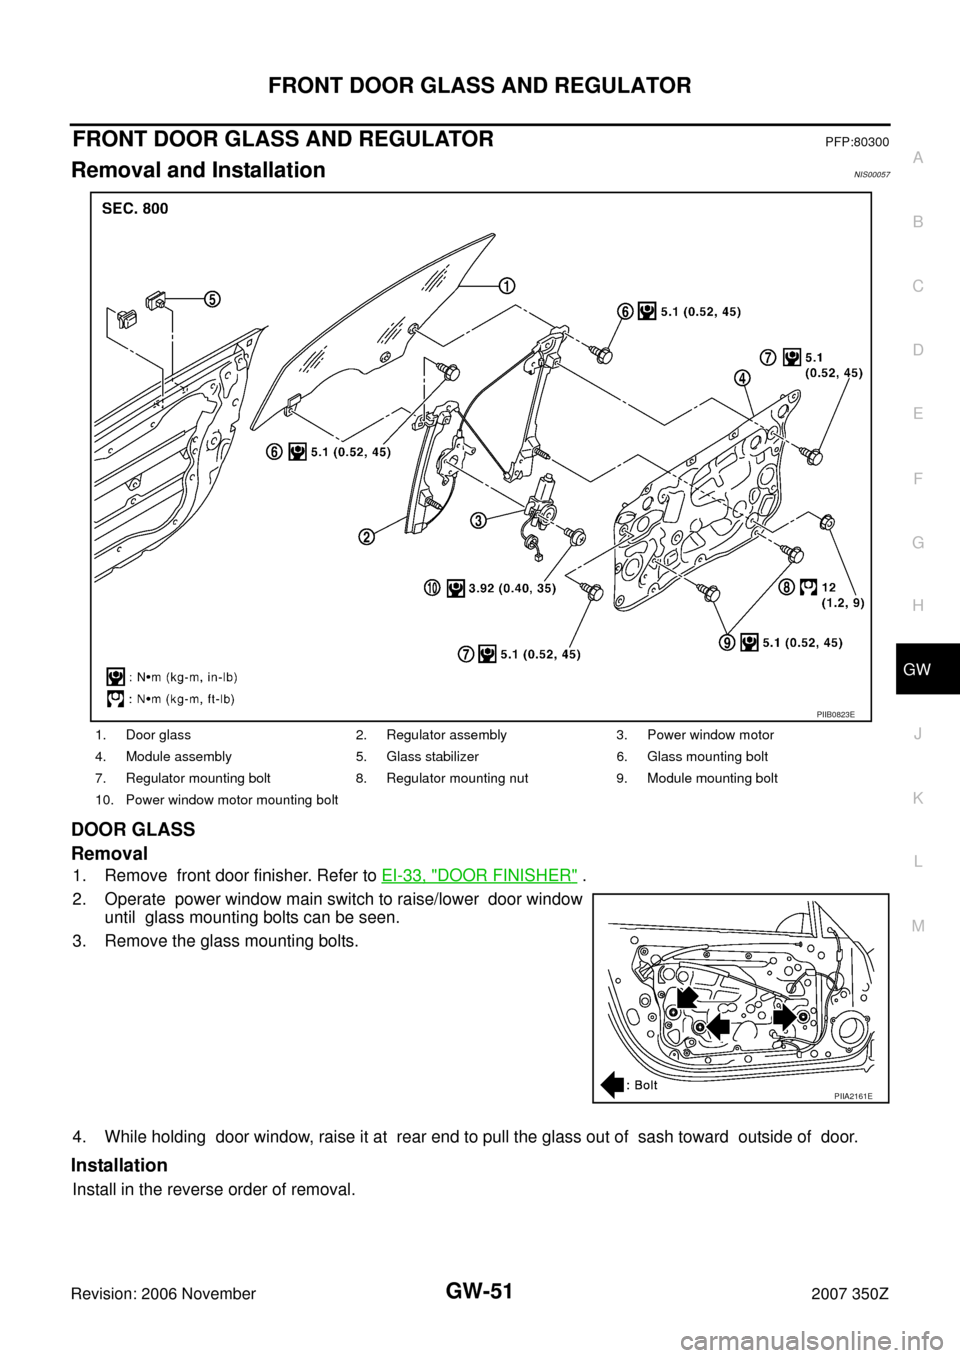 NISSAN 350Z 2007 Z33 Glasses, Windows System And Mirrors Repair Manual FRONT DOOR GLASS AND REGULATOR
GW-51
C
D
E
F
G
H
J
K
L
MA
B
GW
Revision: 2006 November2007 350Z
FRONT DOOR GLASS AND REGULATORPFP:80300
Removal and InstallationNIS00057
DOOR GLASS
Removal
1. Remove  f